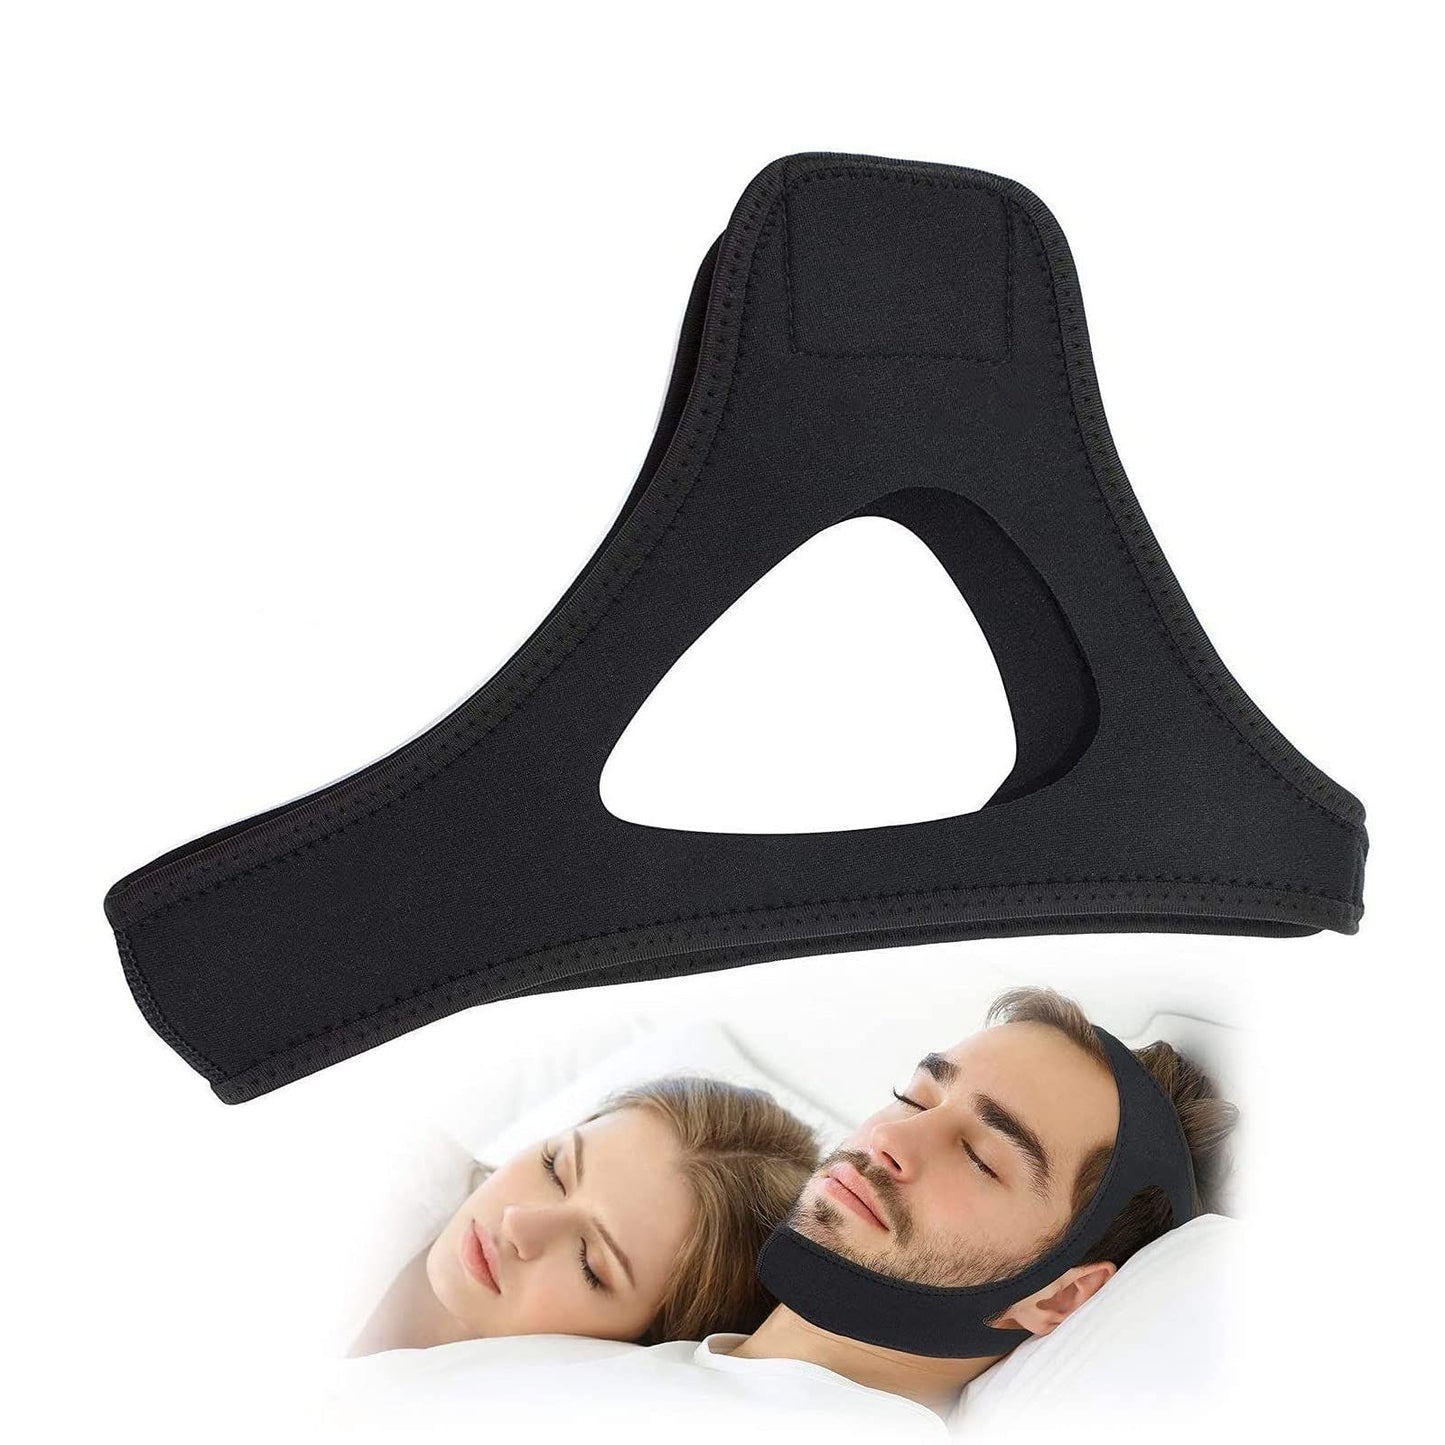 [Upgraded 2022]Anti Snore Chin Strap,Snoring Solution Effective Anti Snore Device, Adjustable and Breathable Stop Snoring Head Band for Men Women (Black) [Upgraded 2022]Anti Snore Chin Strap,Snoring Solution Effective Anti Snore Device, Adjustable and Breathable Stop Snoring Head Band for Men Women (Black) 